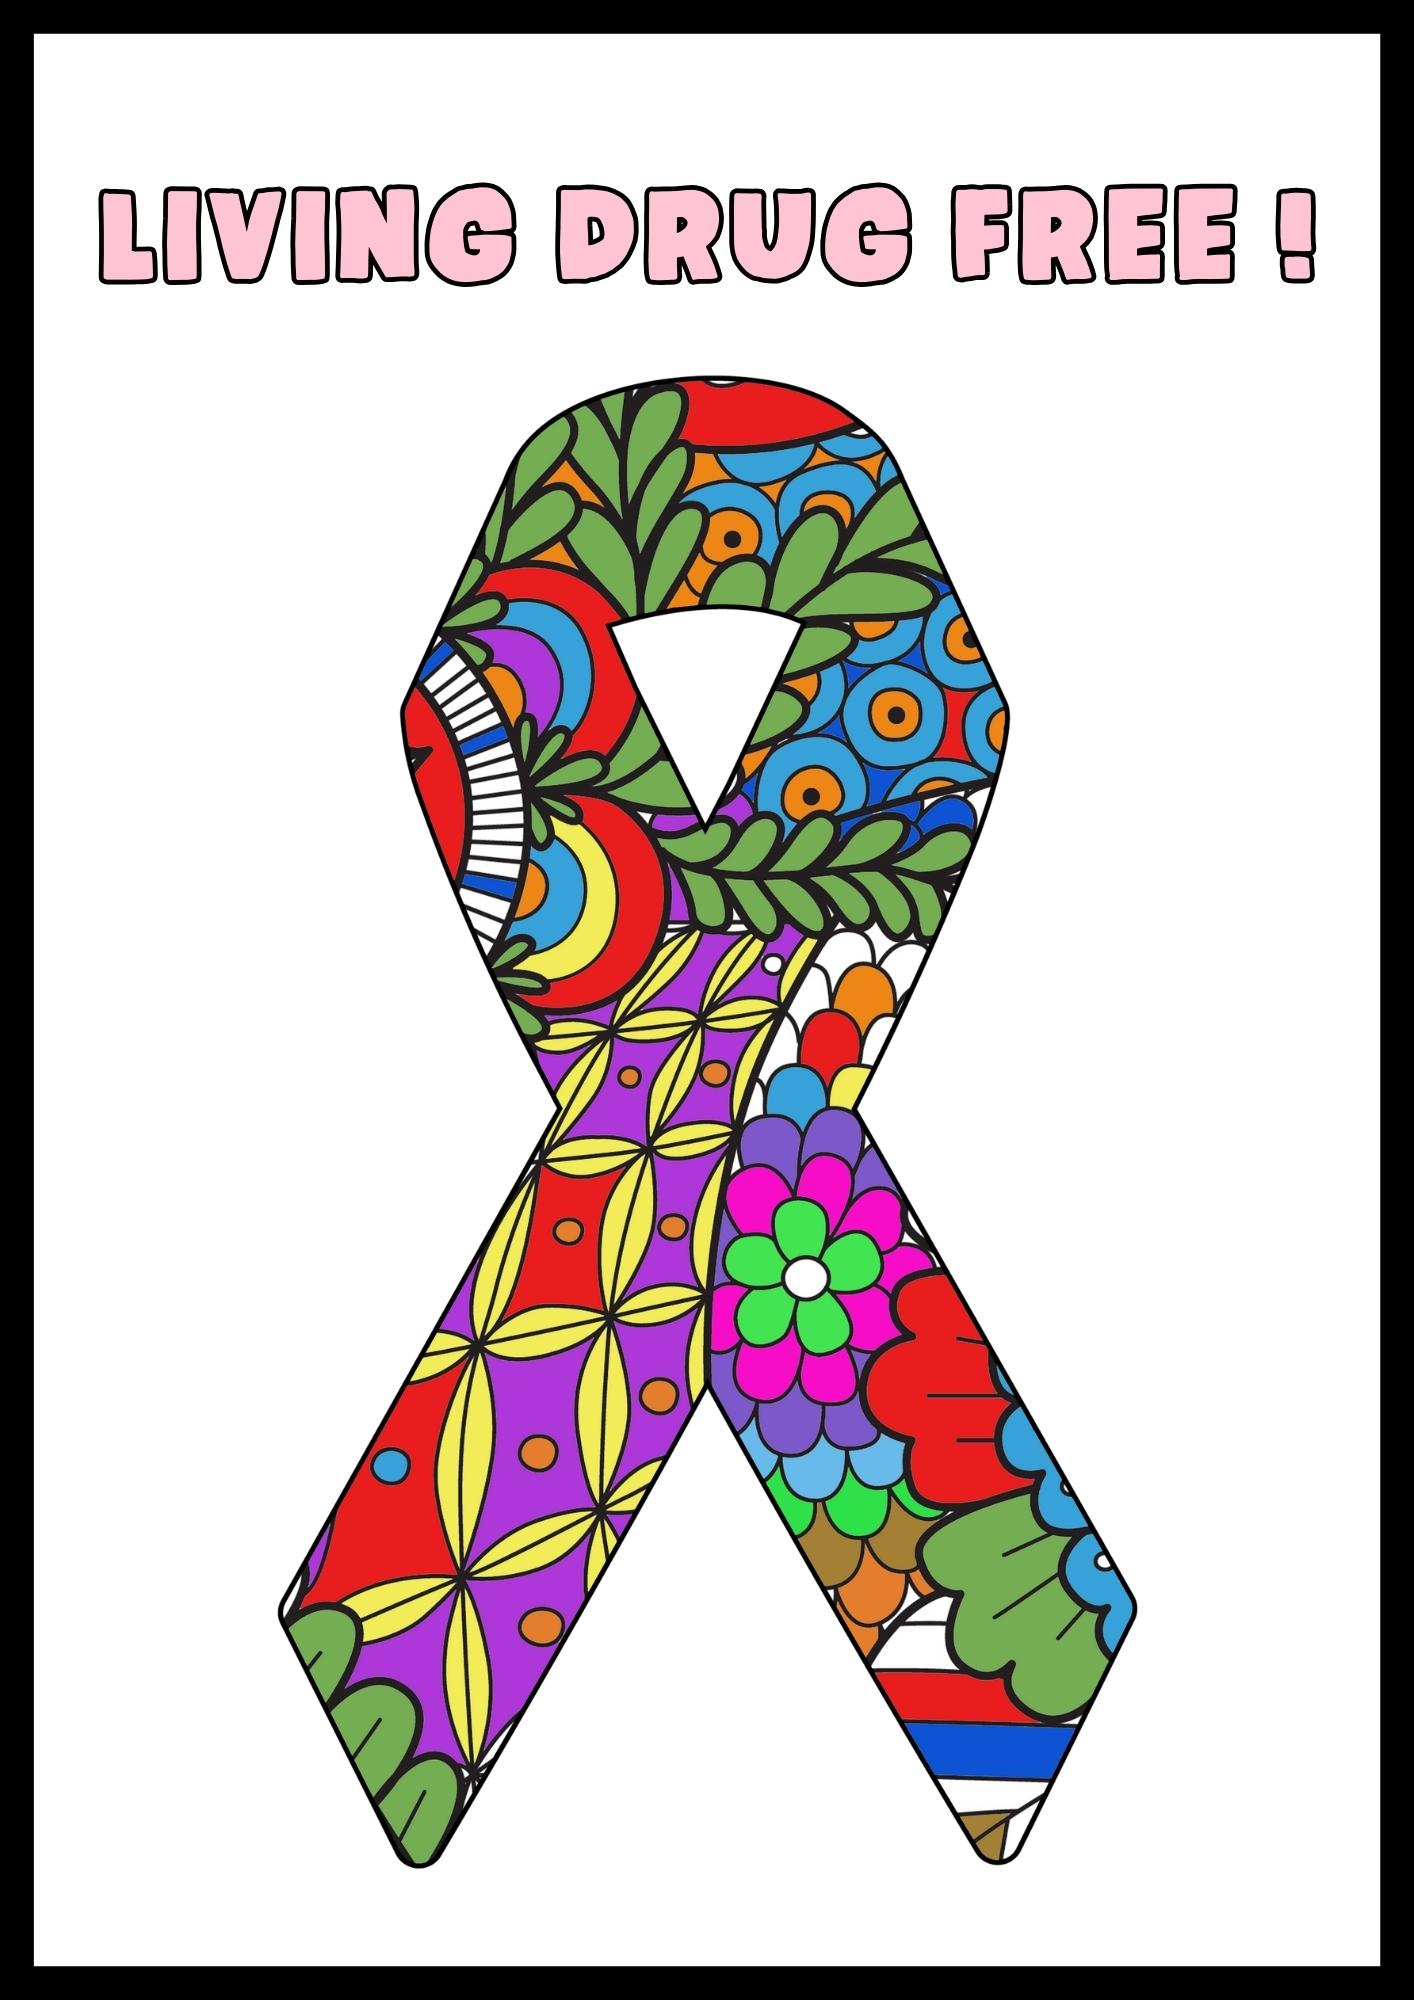 Red ribbon week coloring pages